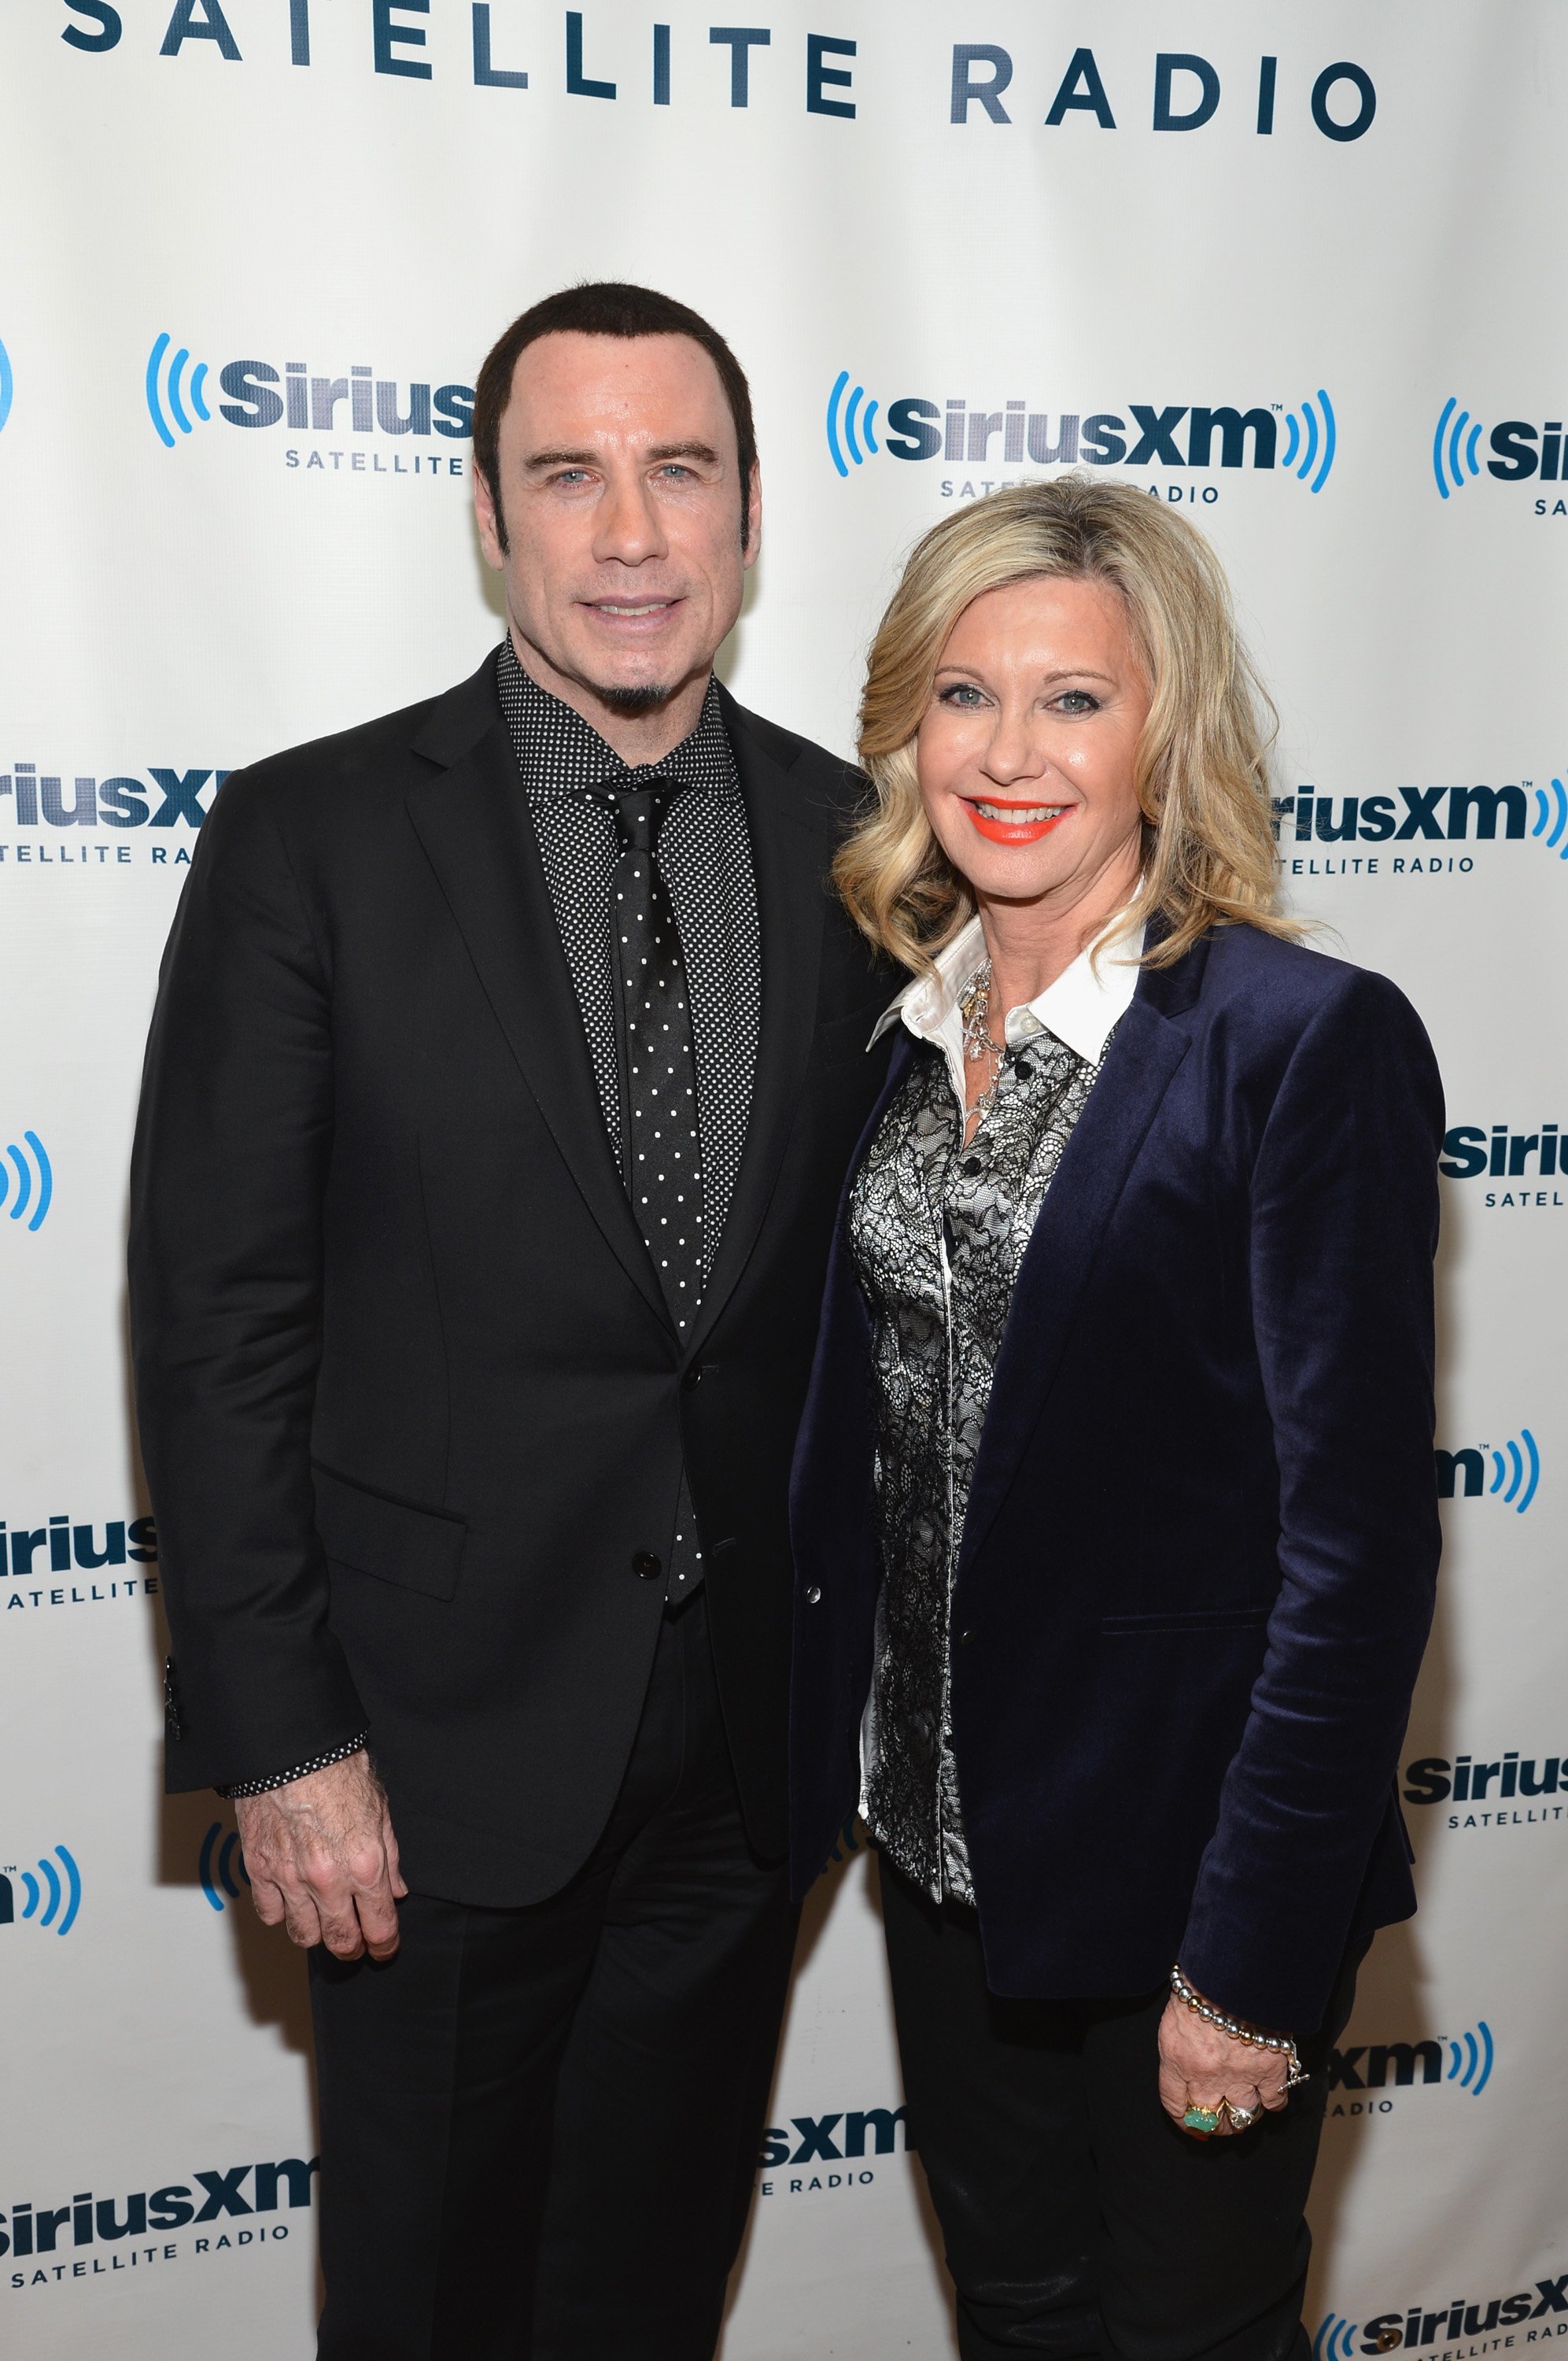 John Travolta and Olivia Newton-John attending SiriusXM's Town Hall with John Travolta and Olivia Newton-John at the SiriusXM studios on December 12, 2012 in New York City. / Source: Getty Images